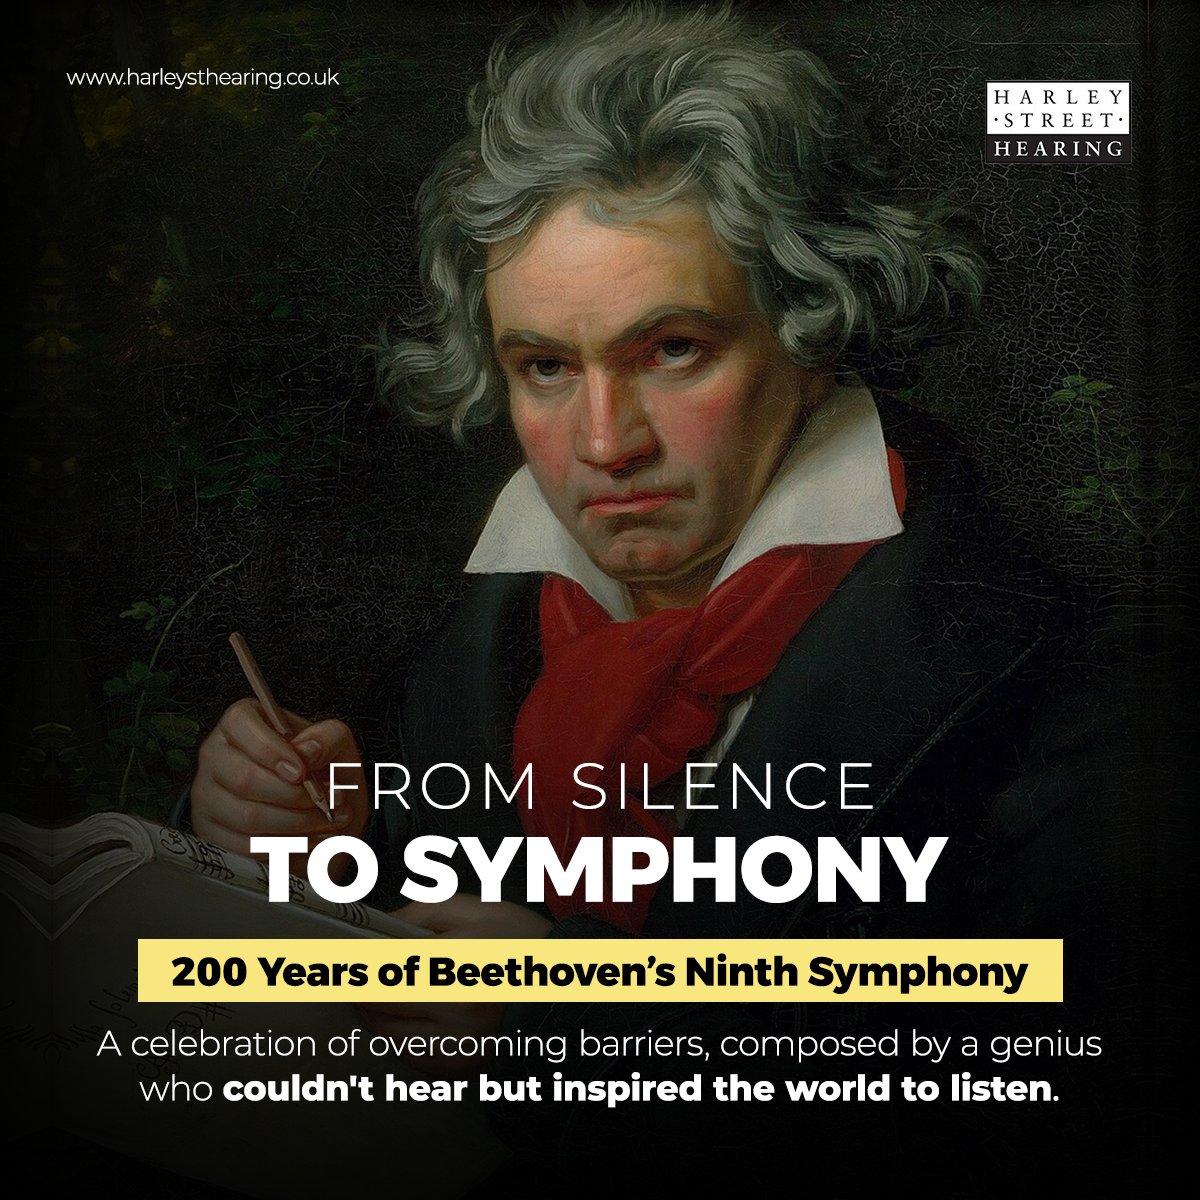 As we mark 200 years of Beethoven’s Ninth Symphony during Deaf Awareness Week, let's honour every note and nuance as a tribute to overcoming adversity and the resilience of the deaf community.

#HarleyStHearing #DAW #DeafAwarenessWeek #BeethovenNinthSymphony #MusicalGenius